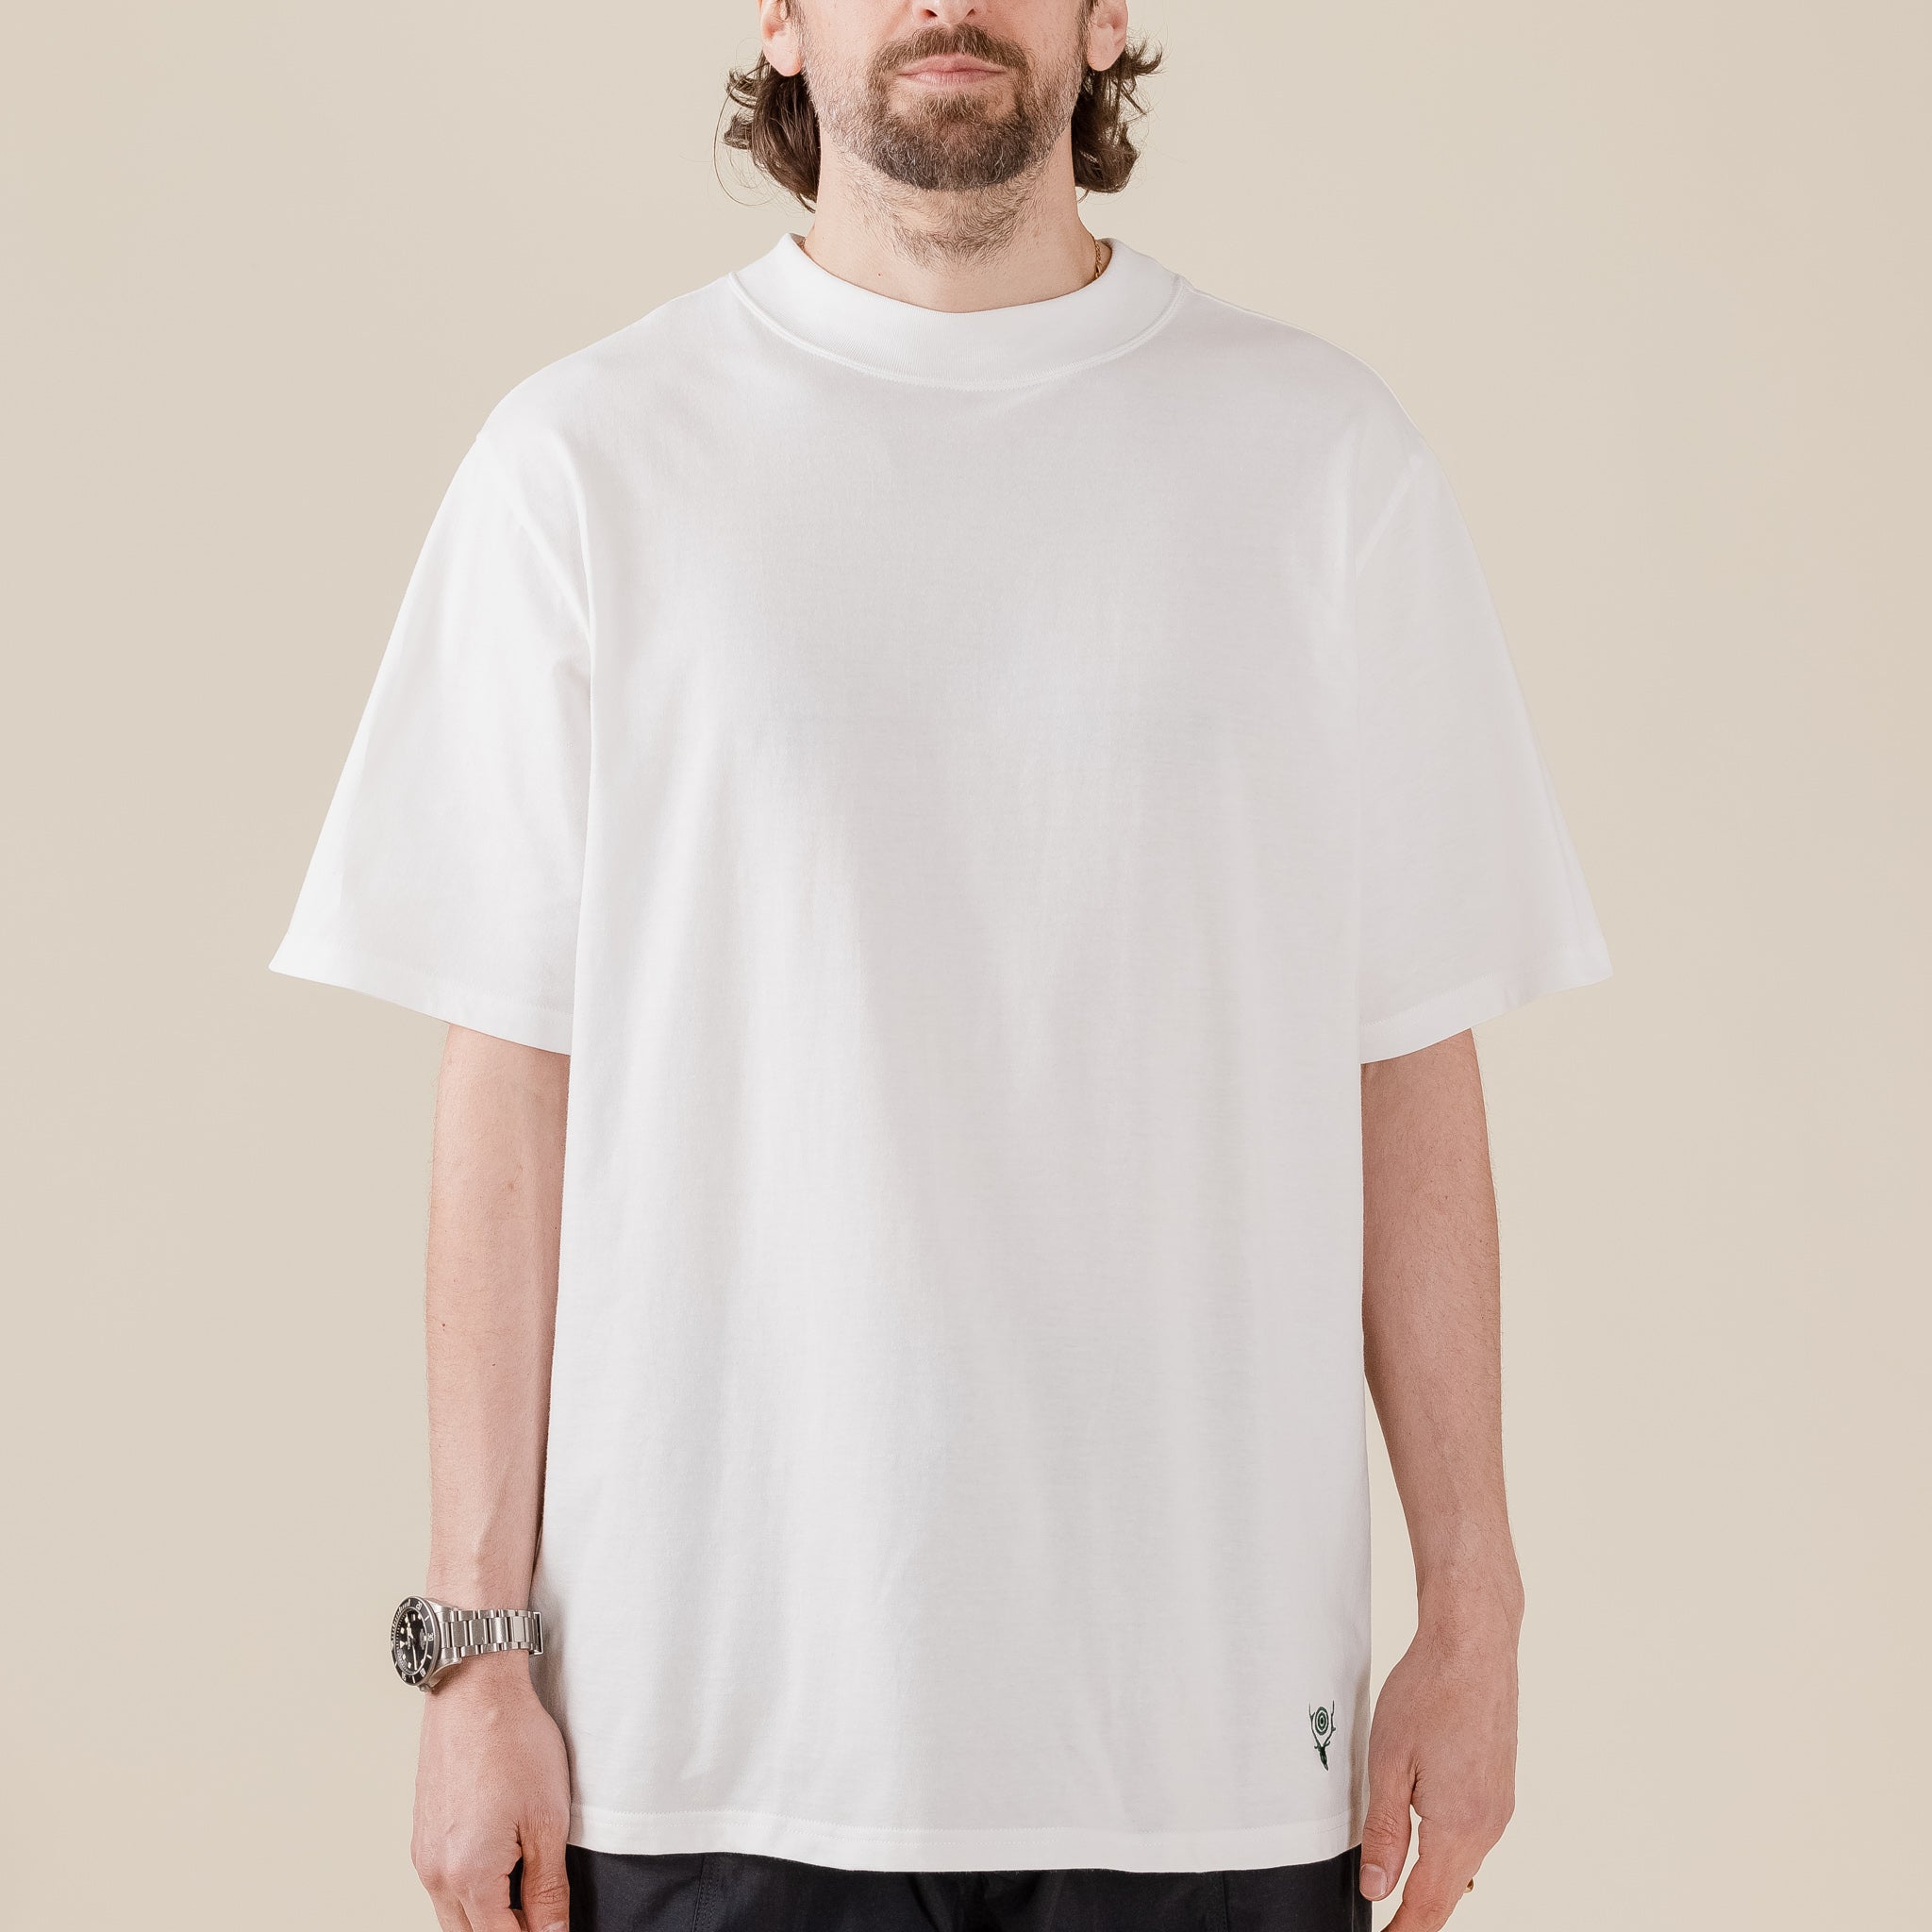 South2 West8 - S/S Mock Neck Cordura Jersey T-Shirt - White "south 2 west 8" "s2w8" "s2w8 stockists" "south 2 west 8 stockists" "south 2 west 8 sale" "south 2 west 8 uk" "south 2 west 8 USA" "nepenthes" "nepenthes London"